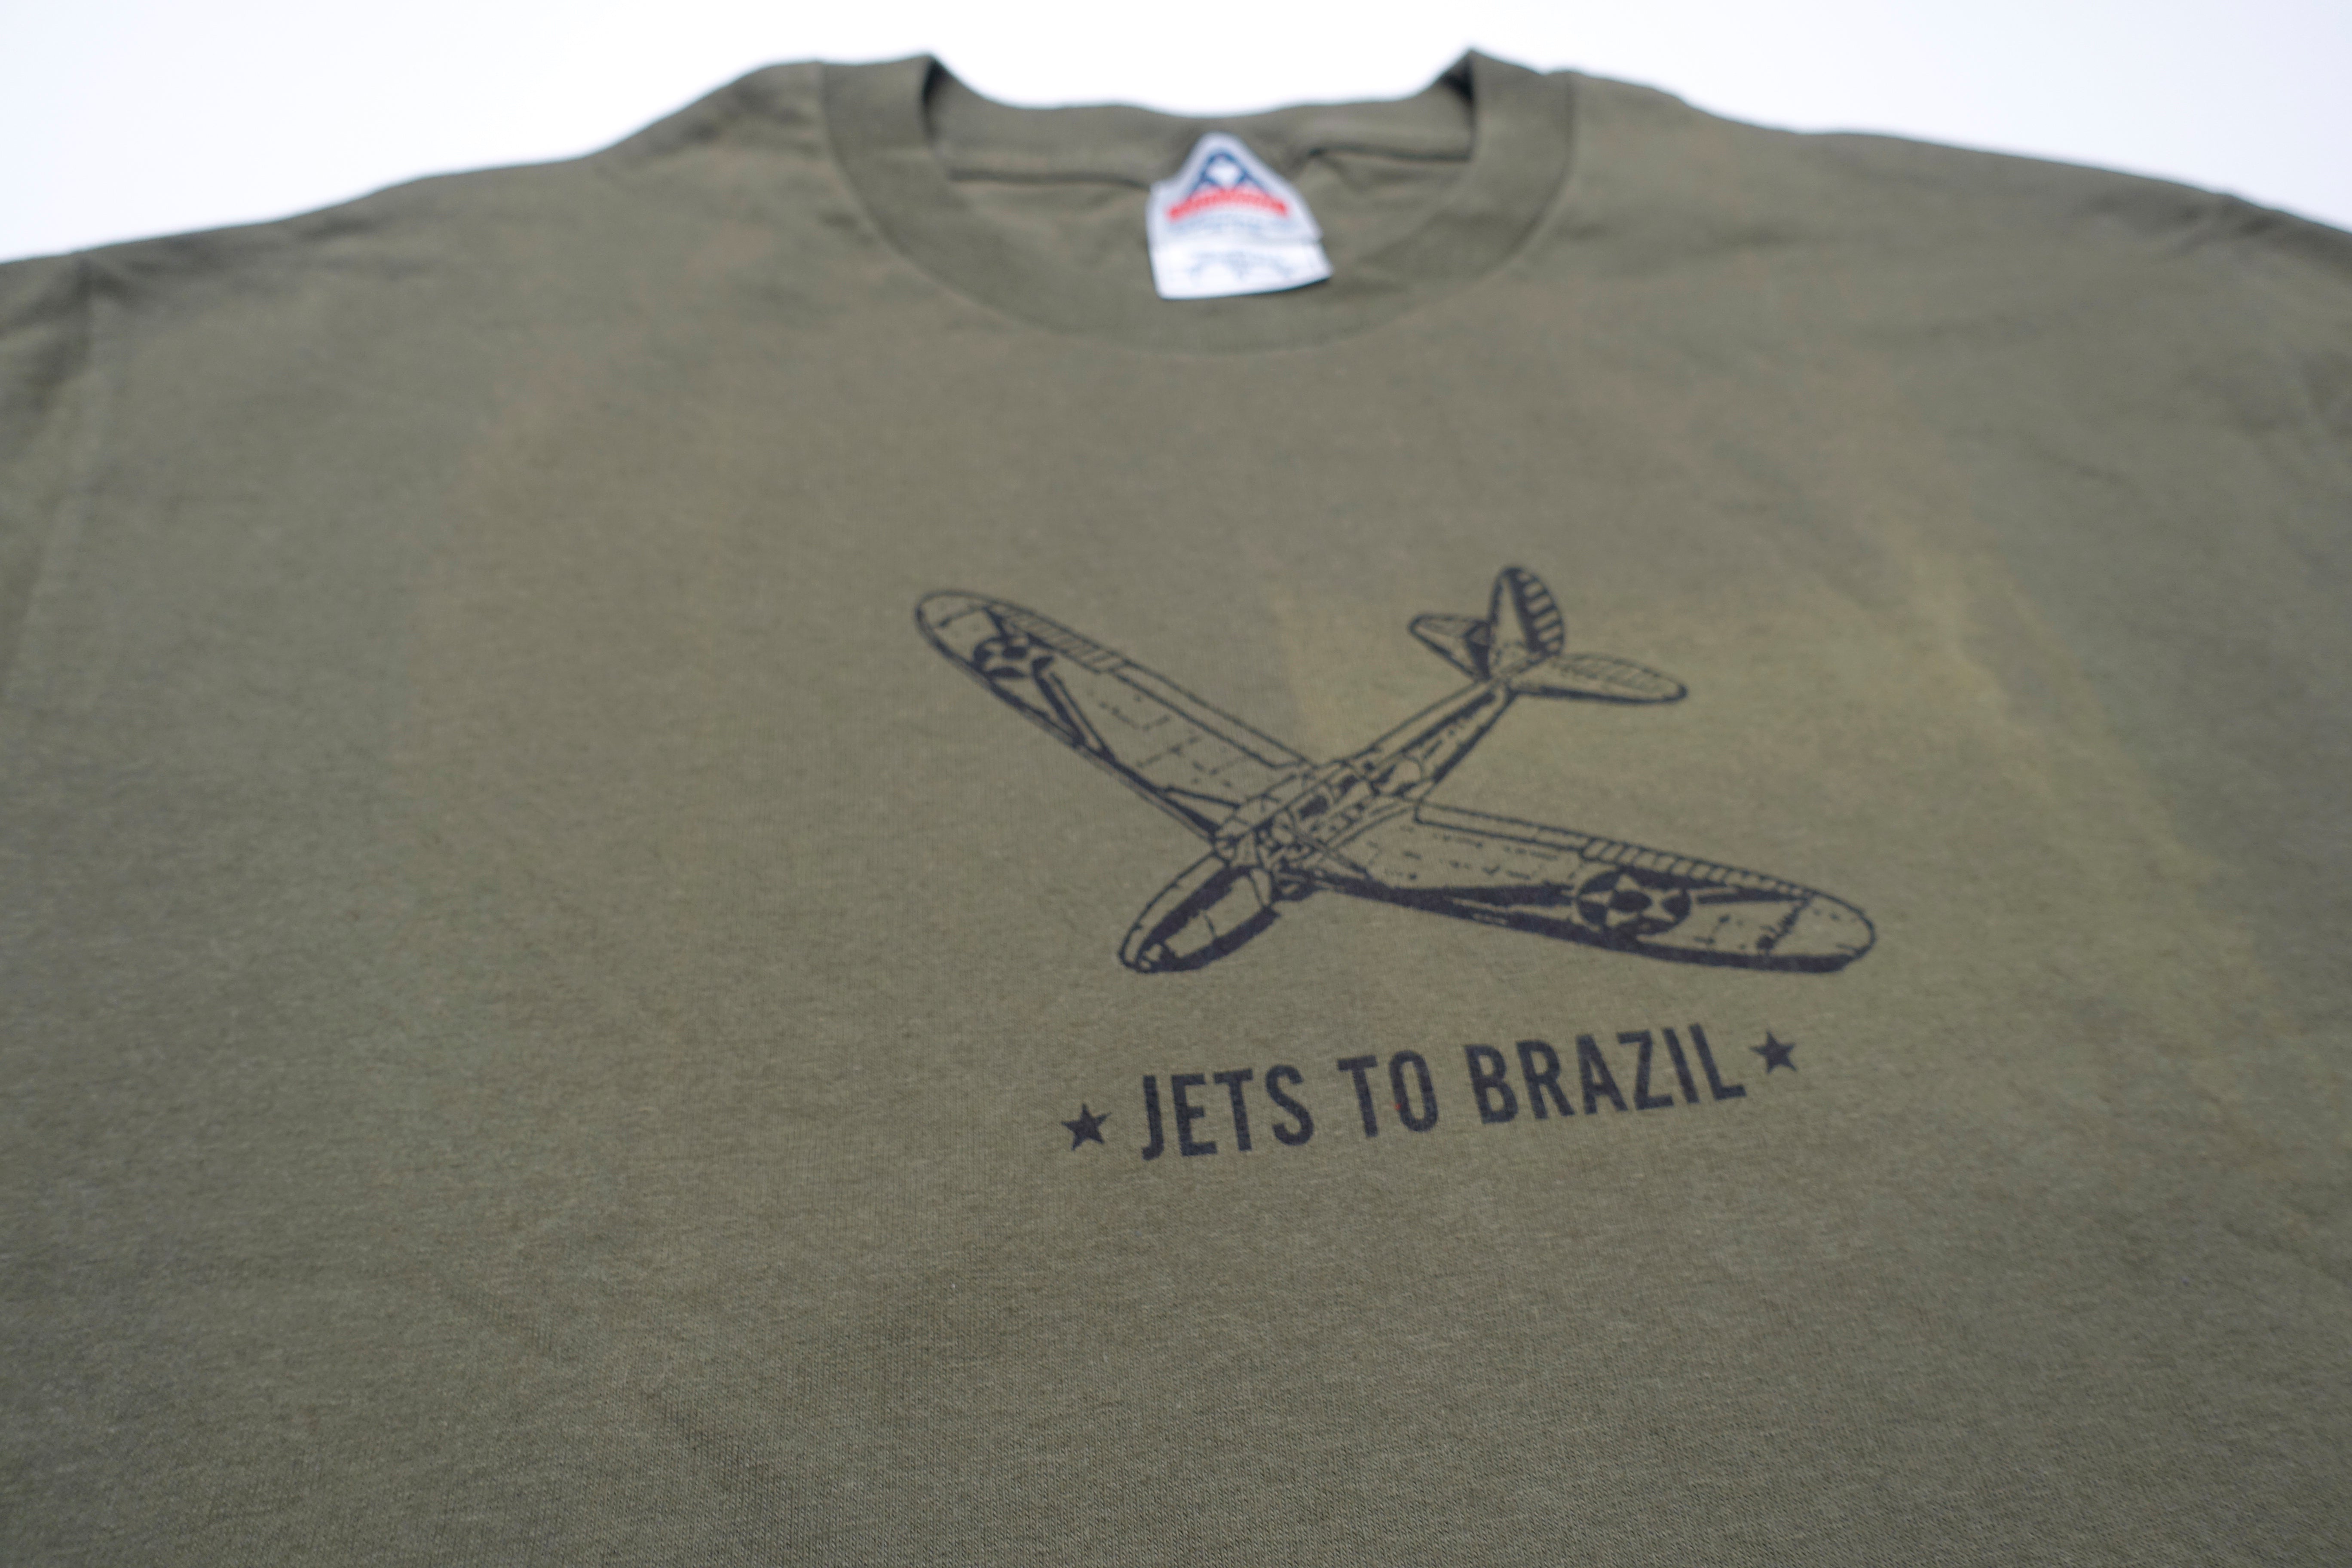 Jets To Brazil - Glider Tour Shirt Size Large (Green)